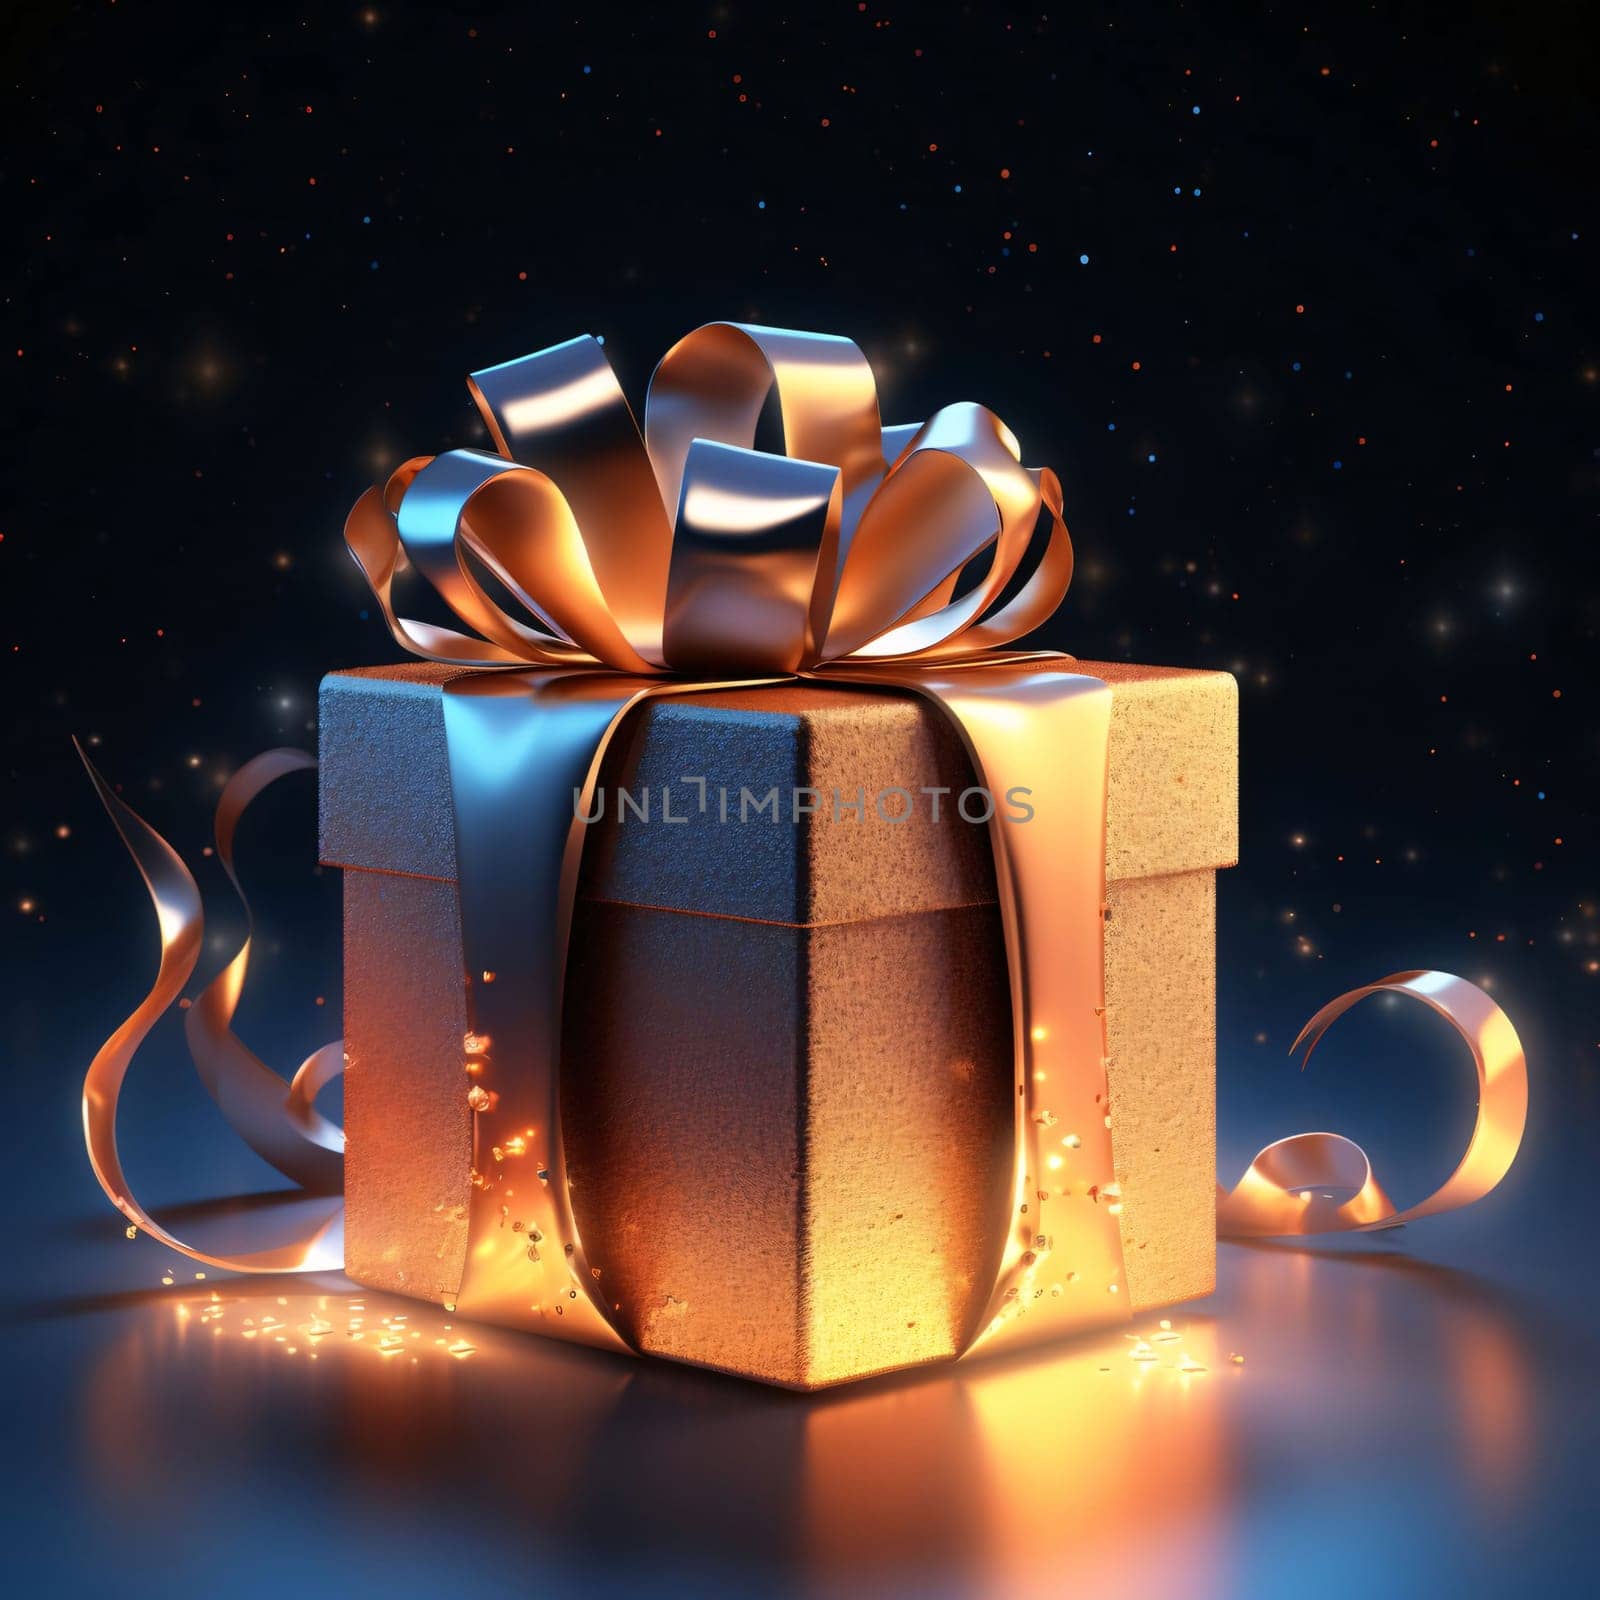 Gold gift with a gold bow on a dark background. Gifts as a day symbol of present and love. A time of falling in love and love.